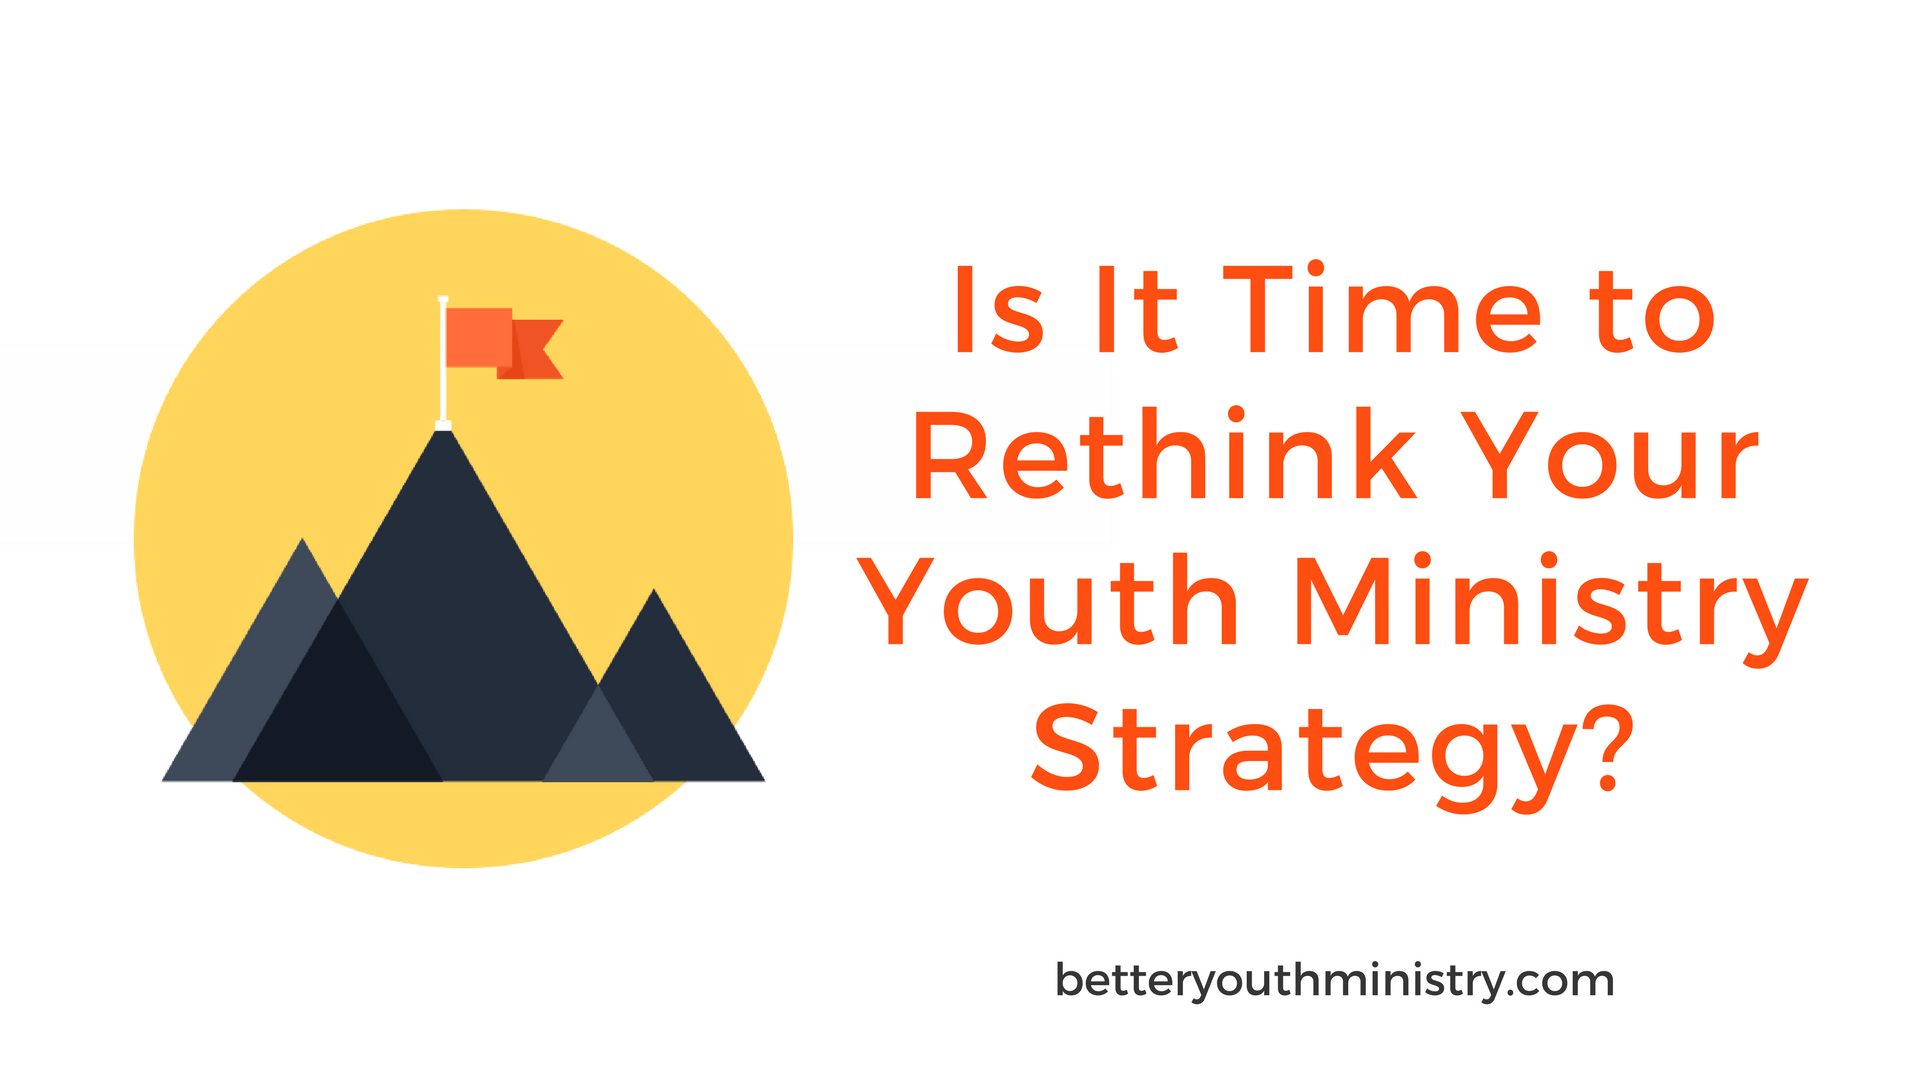 Rethink Your Youth Ministry